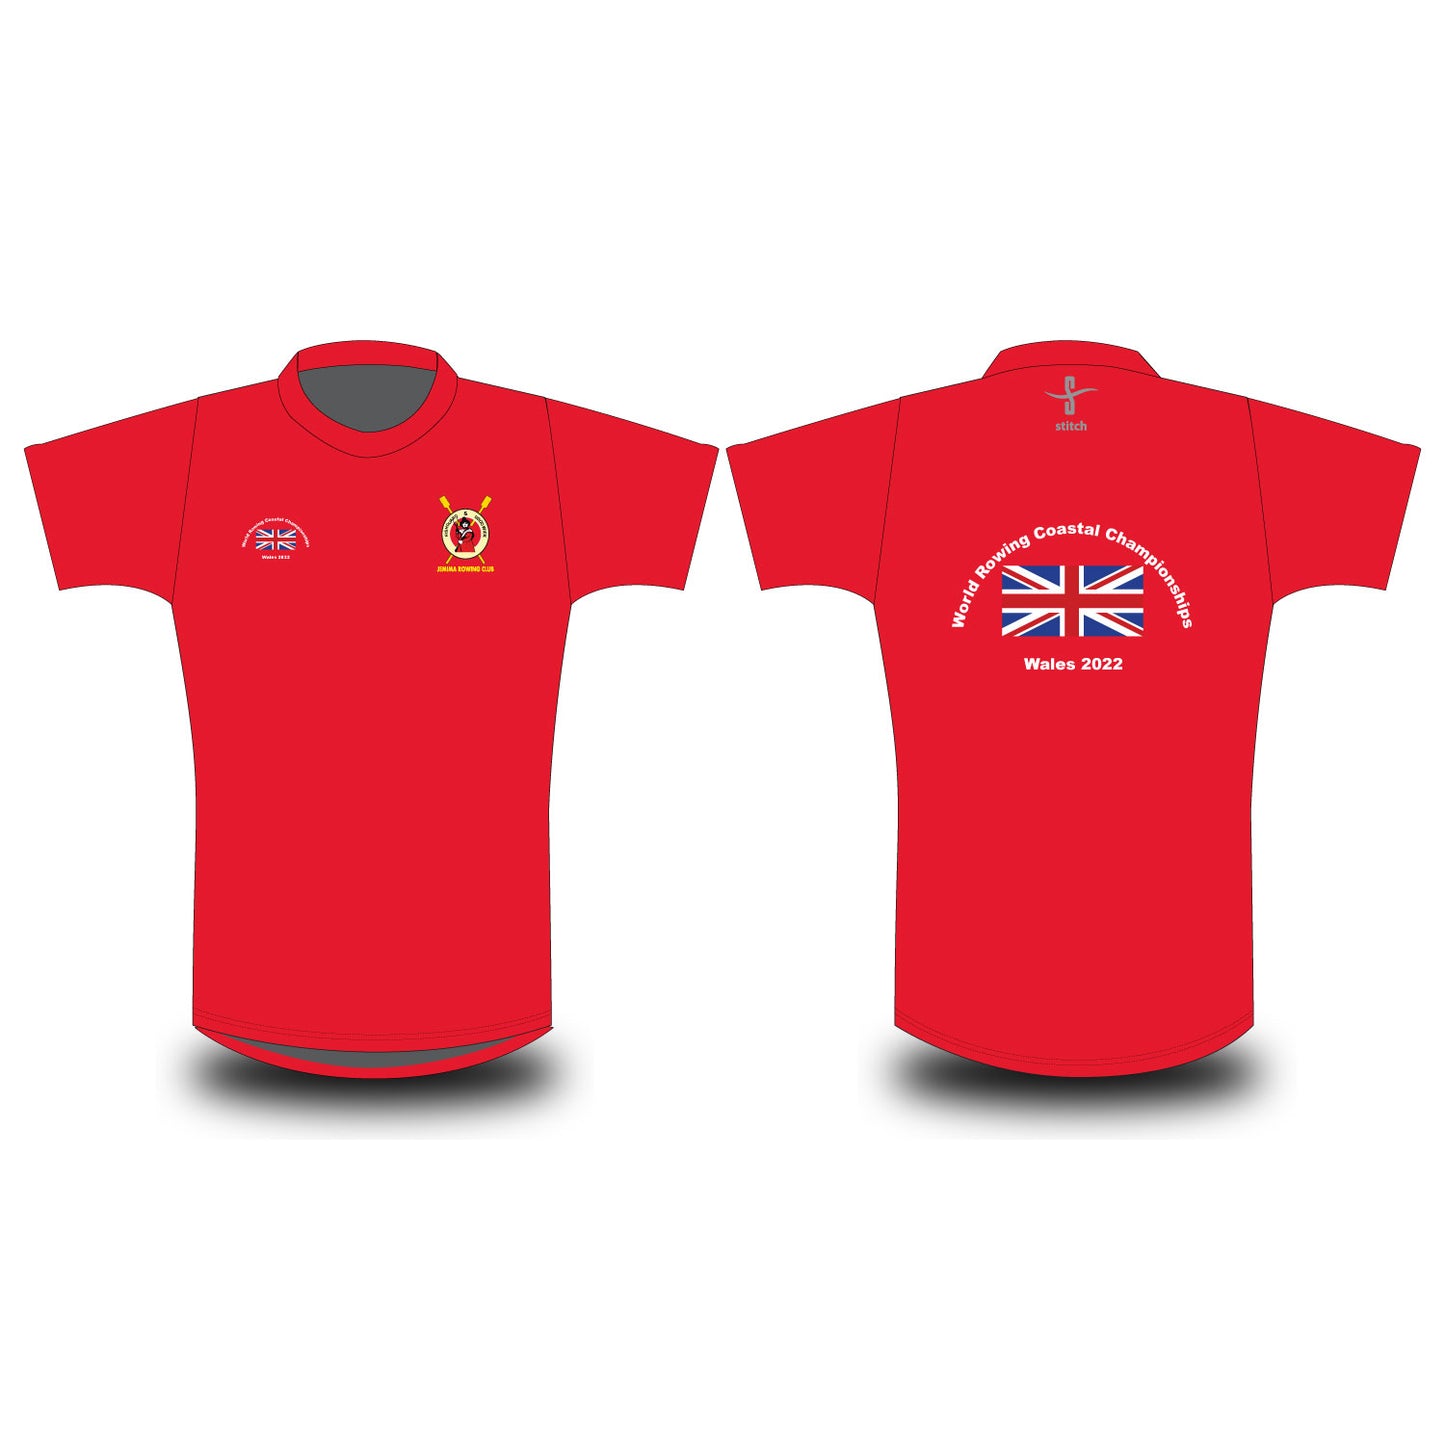 Fishguard and Goodwick WCR Red T-Shirt